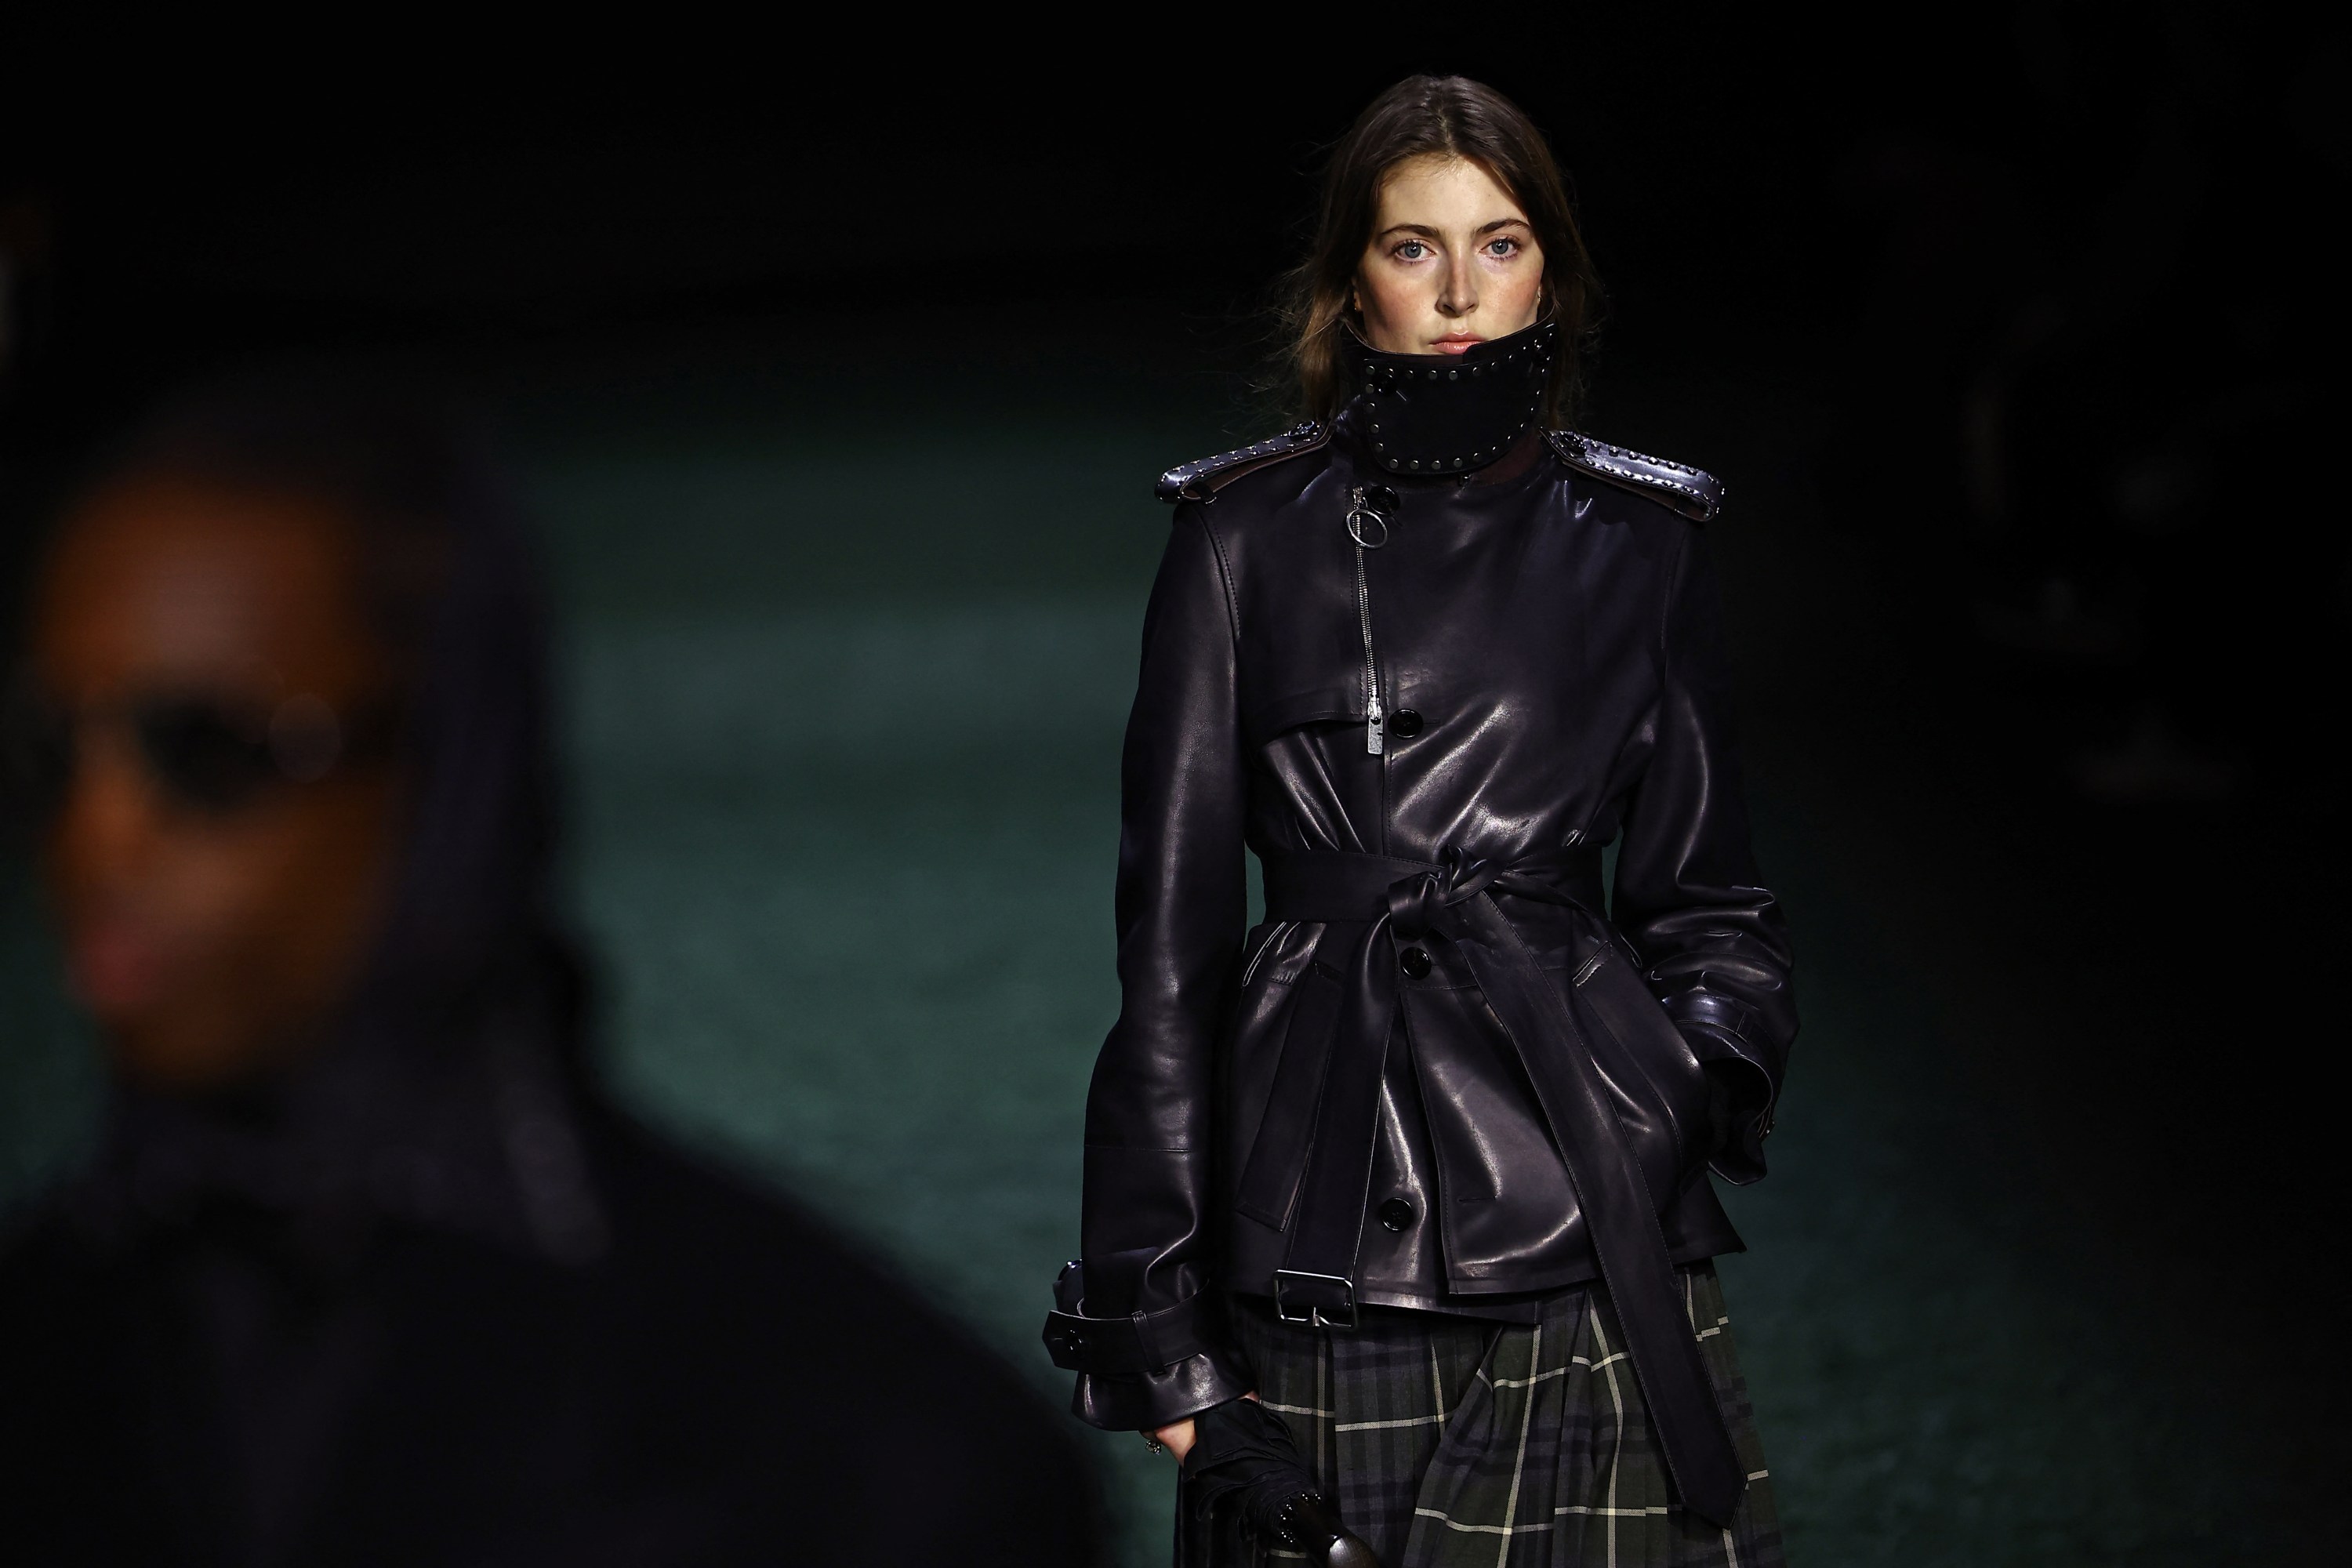 Model Maya Wigram, daughter of Phoebe Philo, walks the runway for Burberry's Autumn/Winter 2024 collection at London Fashion Week in London on February 19, 2024.